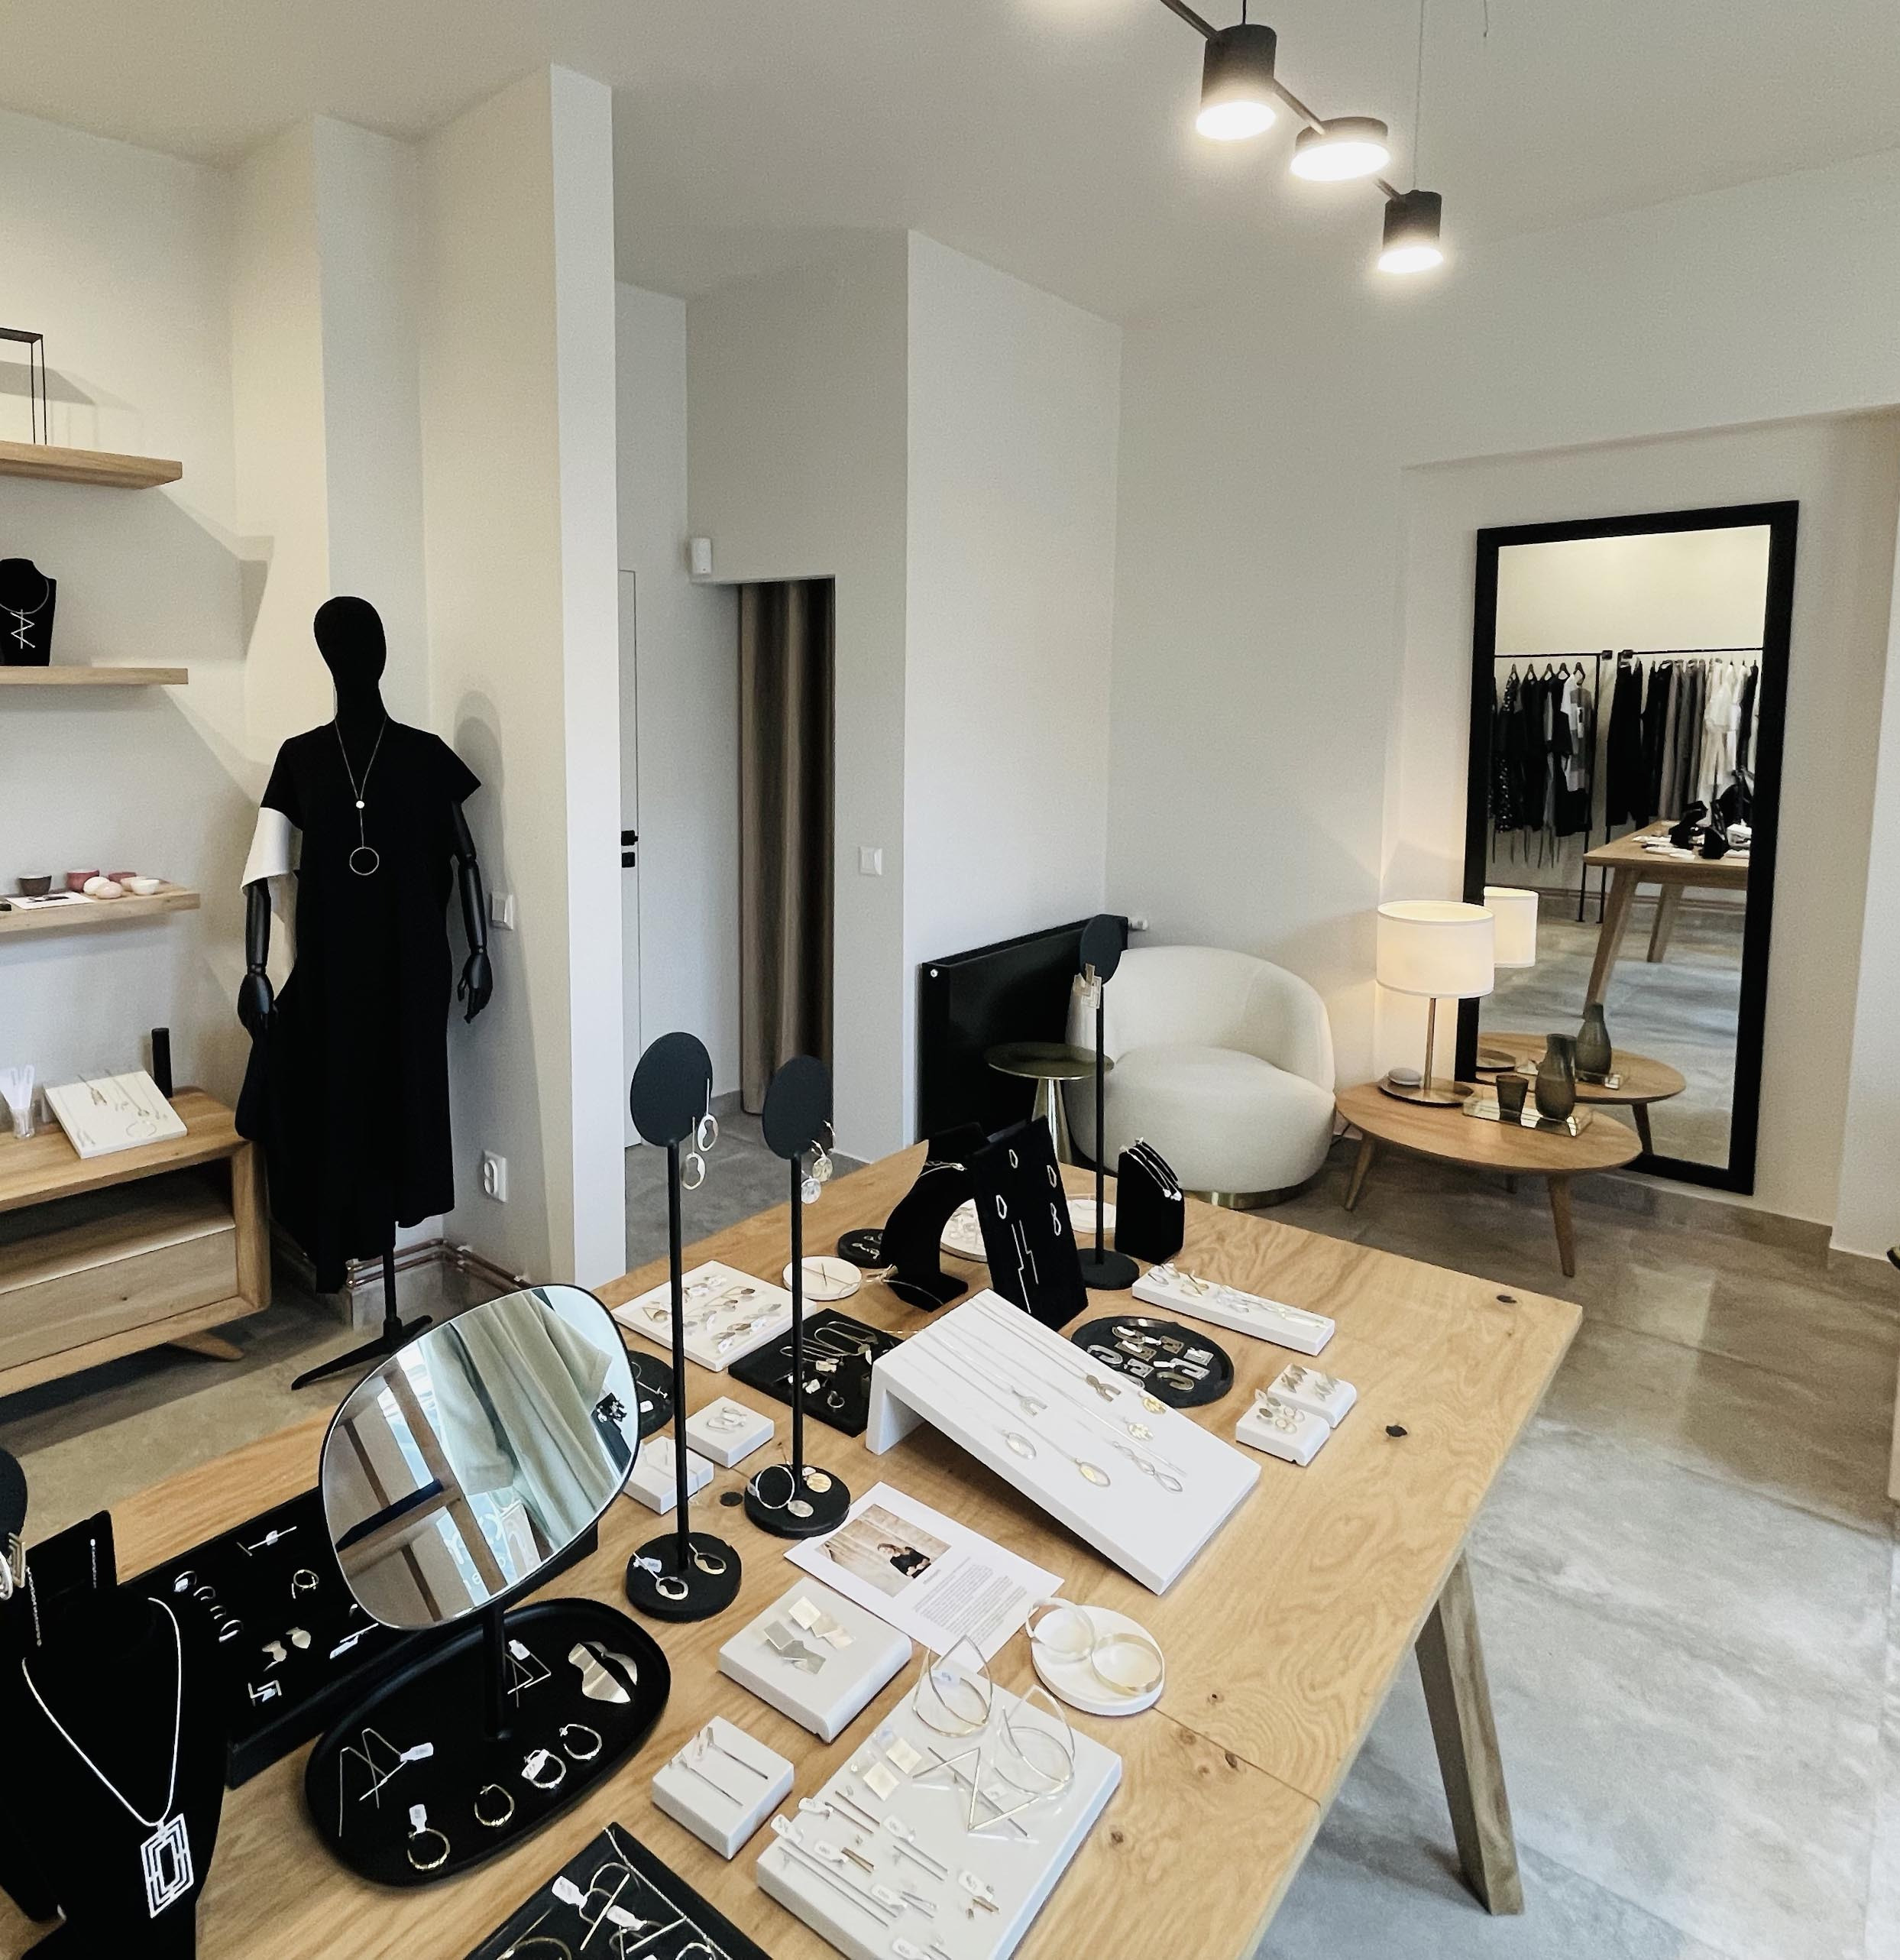 monom the concept store: The Art of Shopping